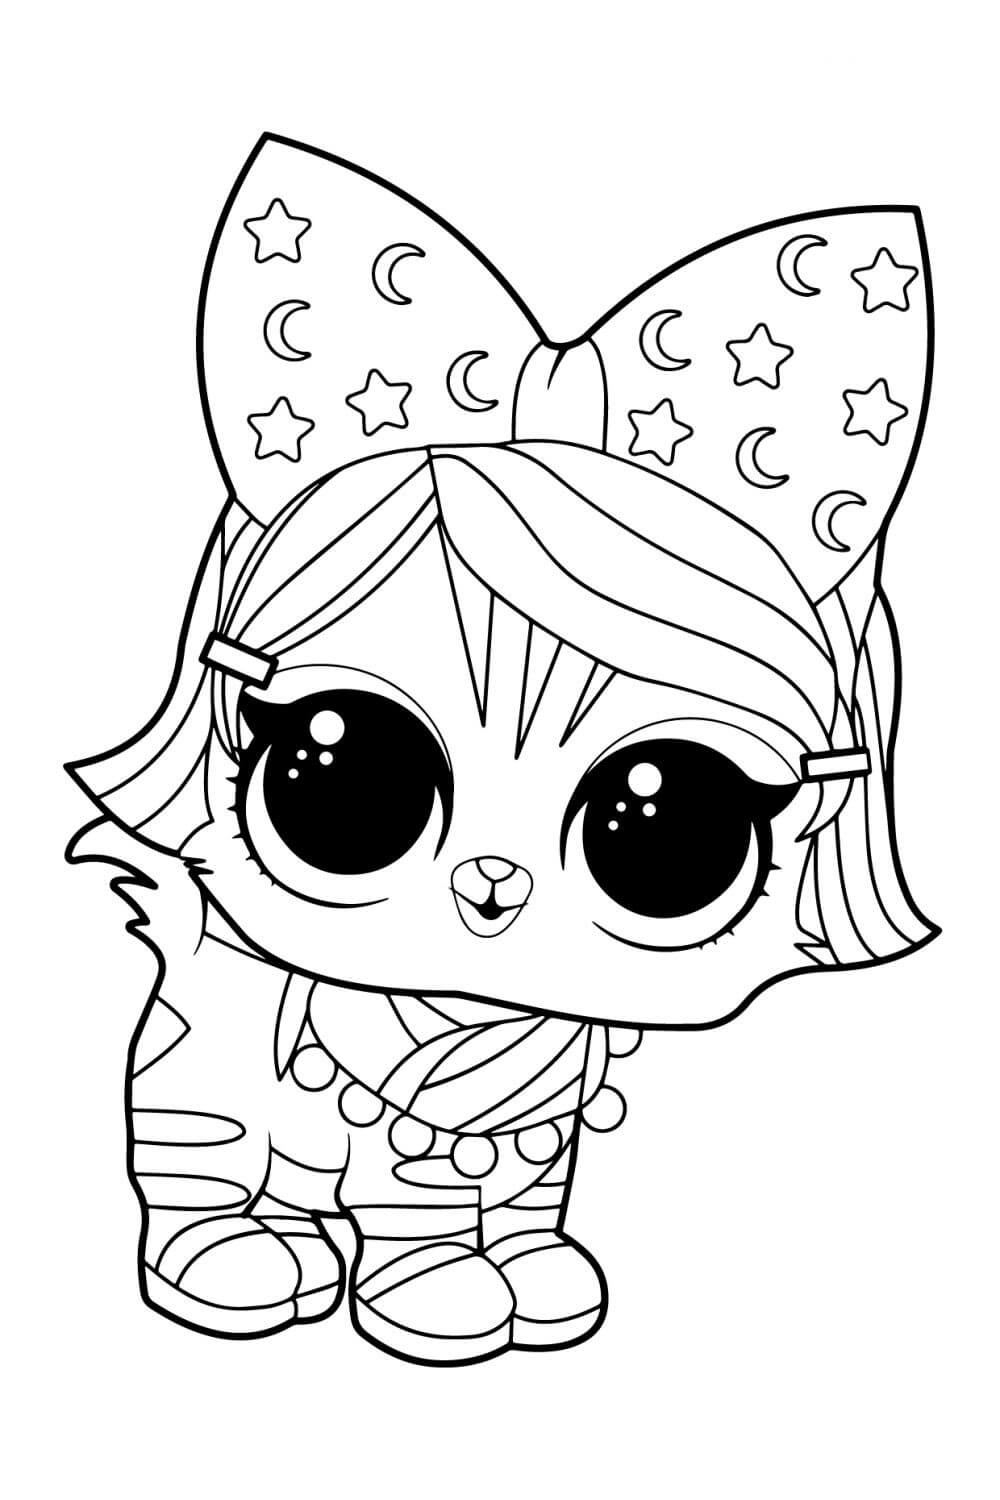 lol rare pet kitten night coloring page free printable coloring pages for kids